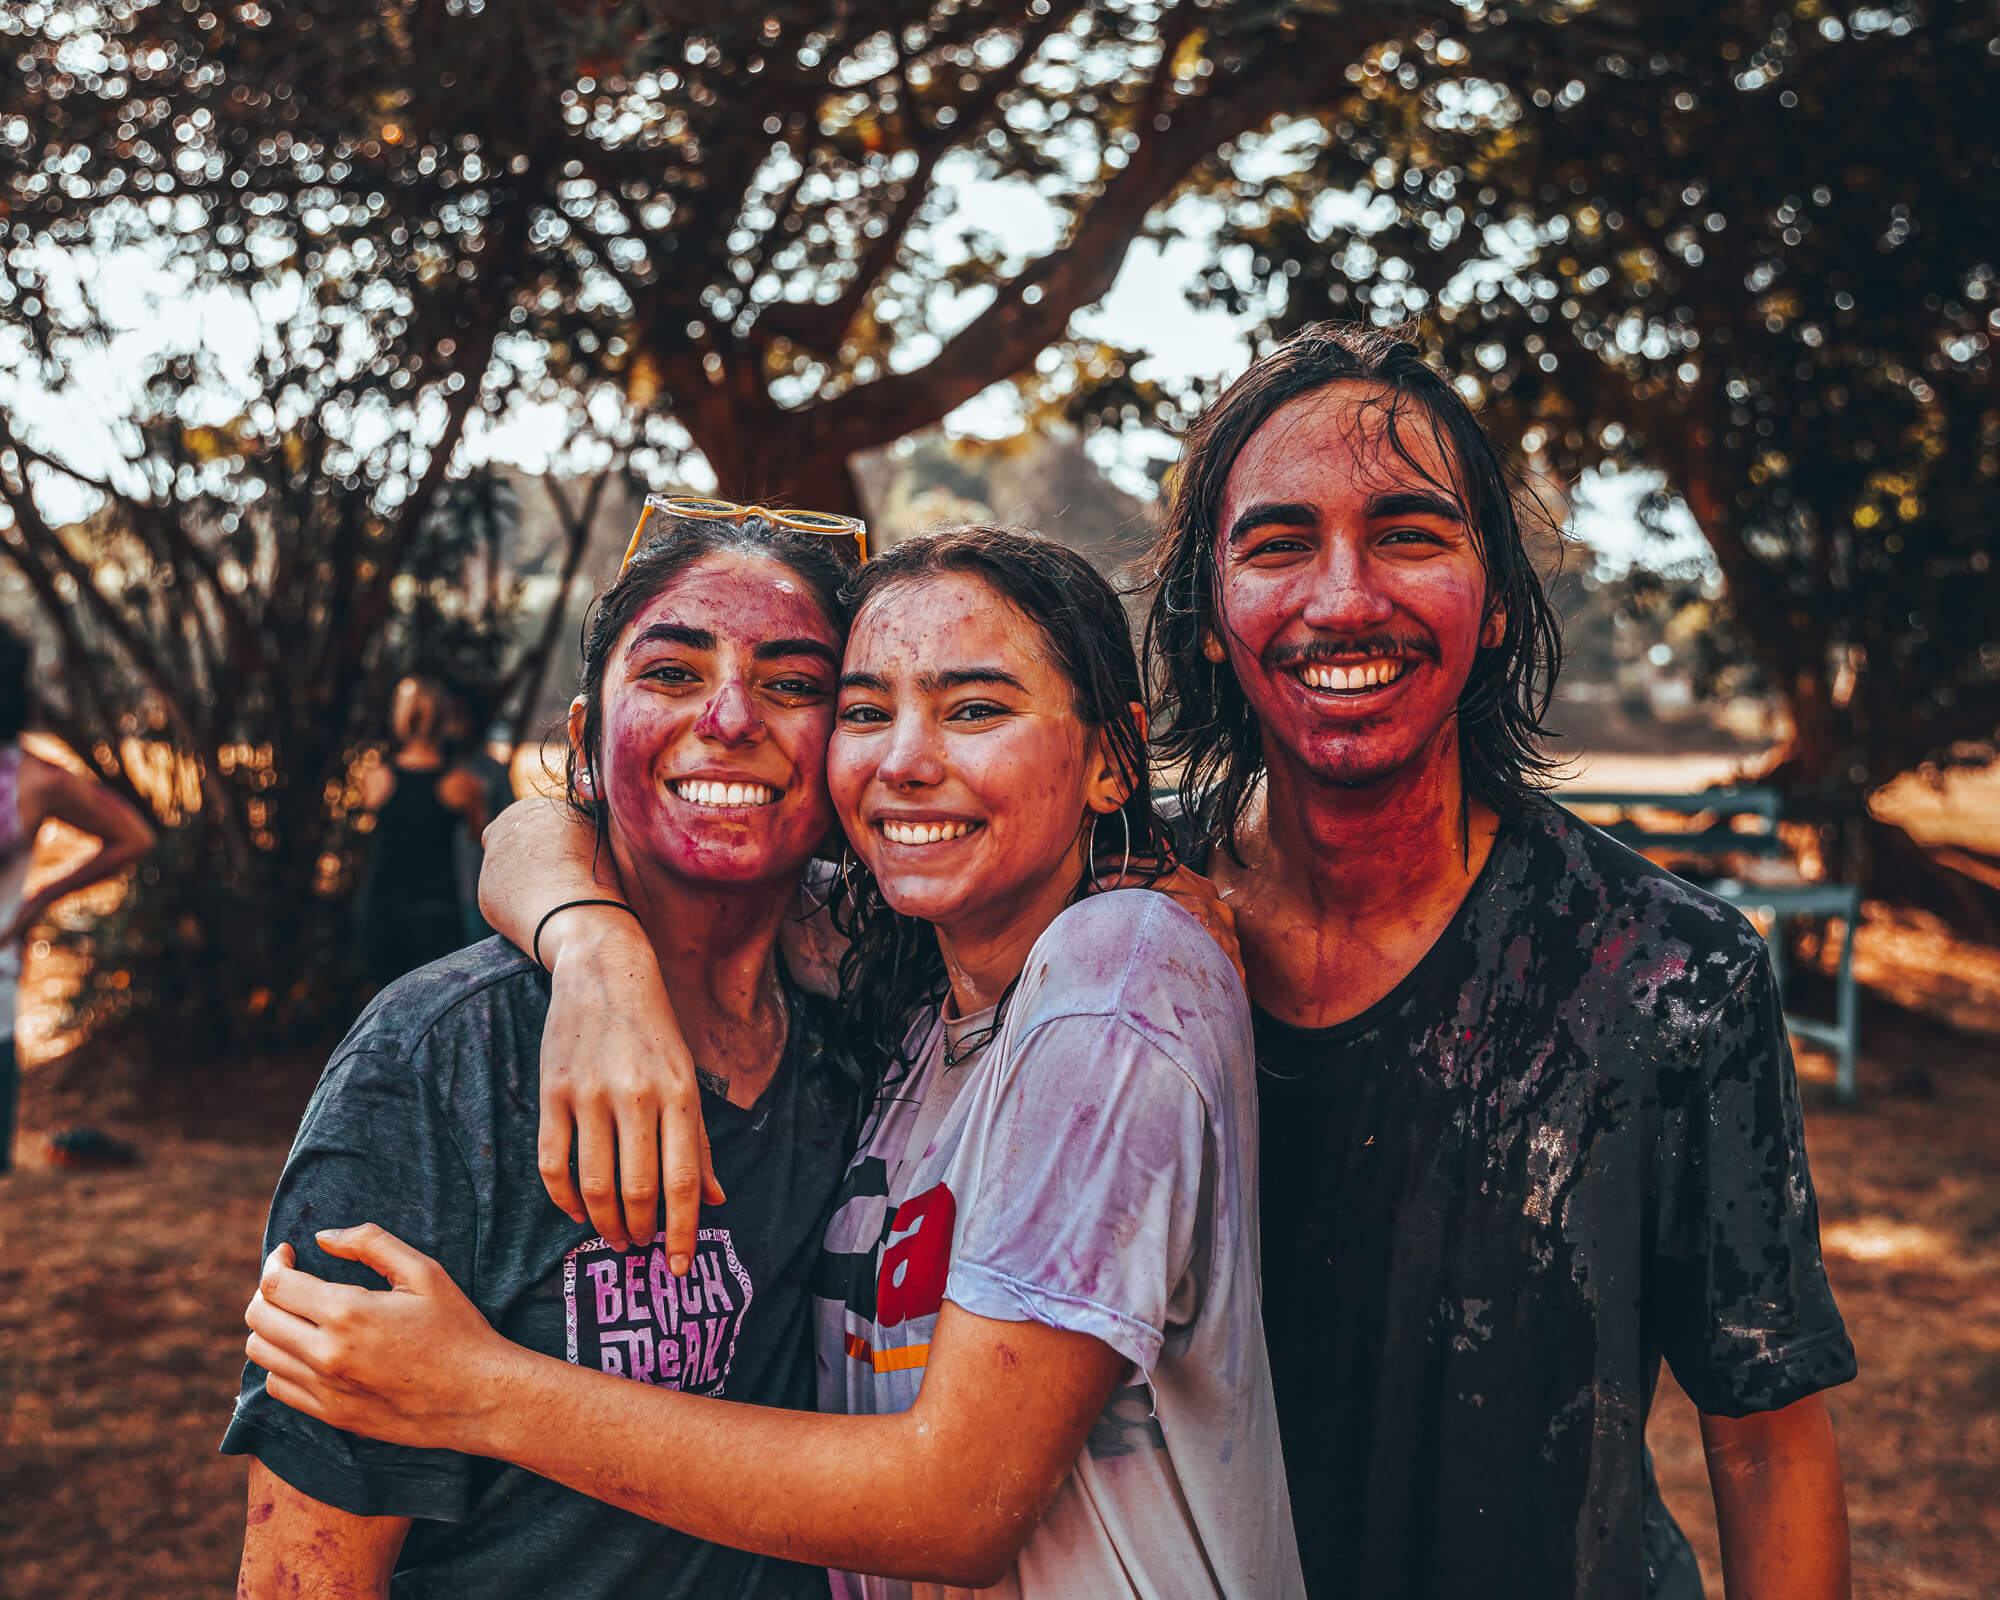 Three young people covered in colorful powder stand outdoors, smiling and hugging, with trees in the background.